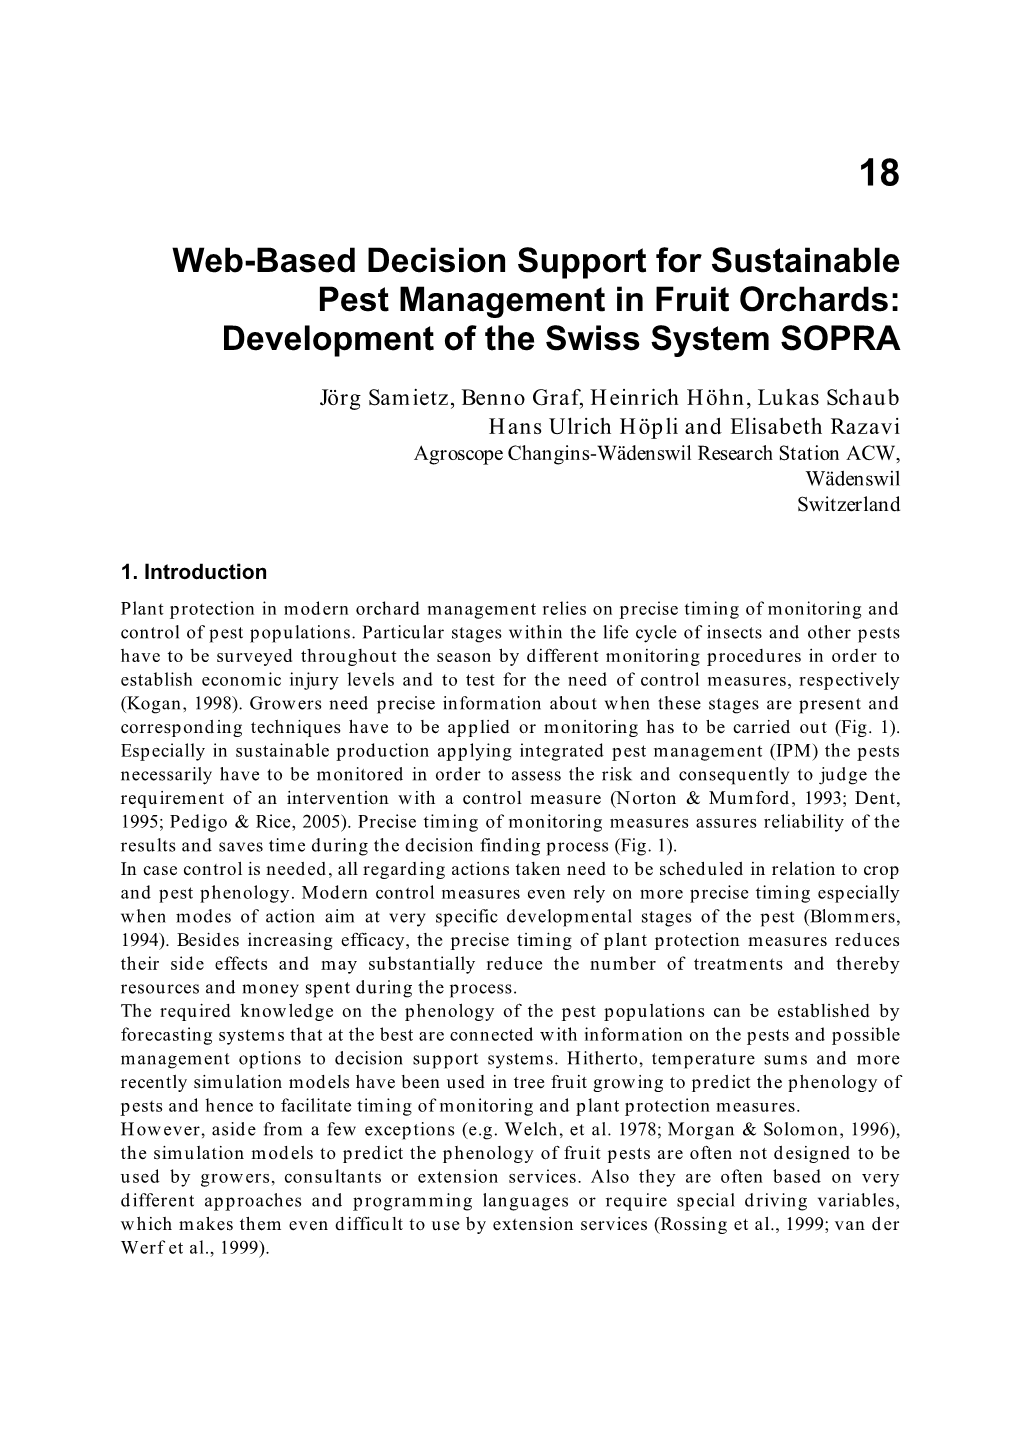 Web-Based Decision Support for Sustainable Pest Management in Fruit Orchards: Development of the Swiss System SOPRA